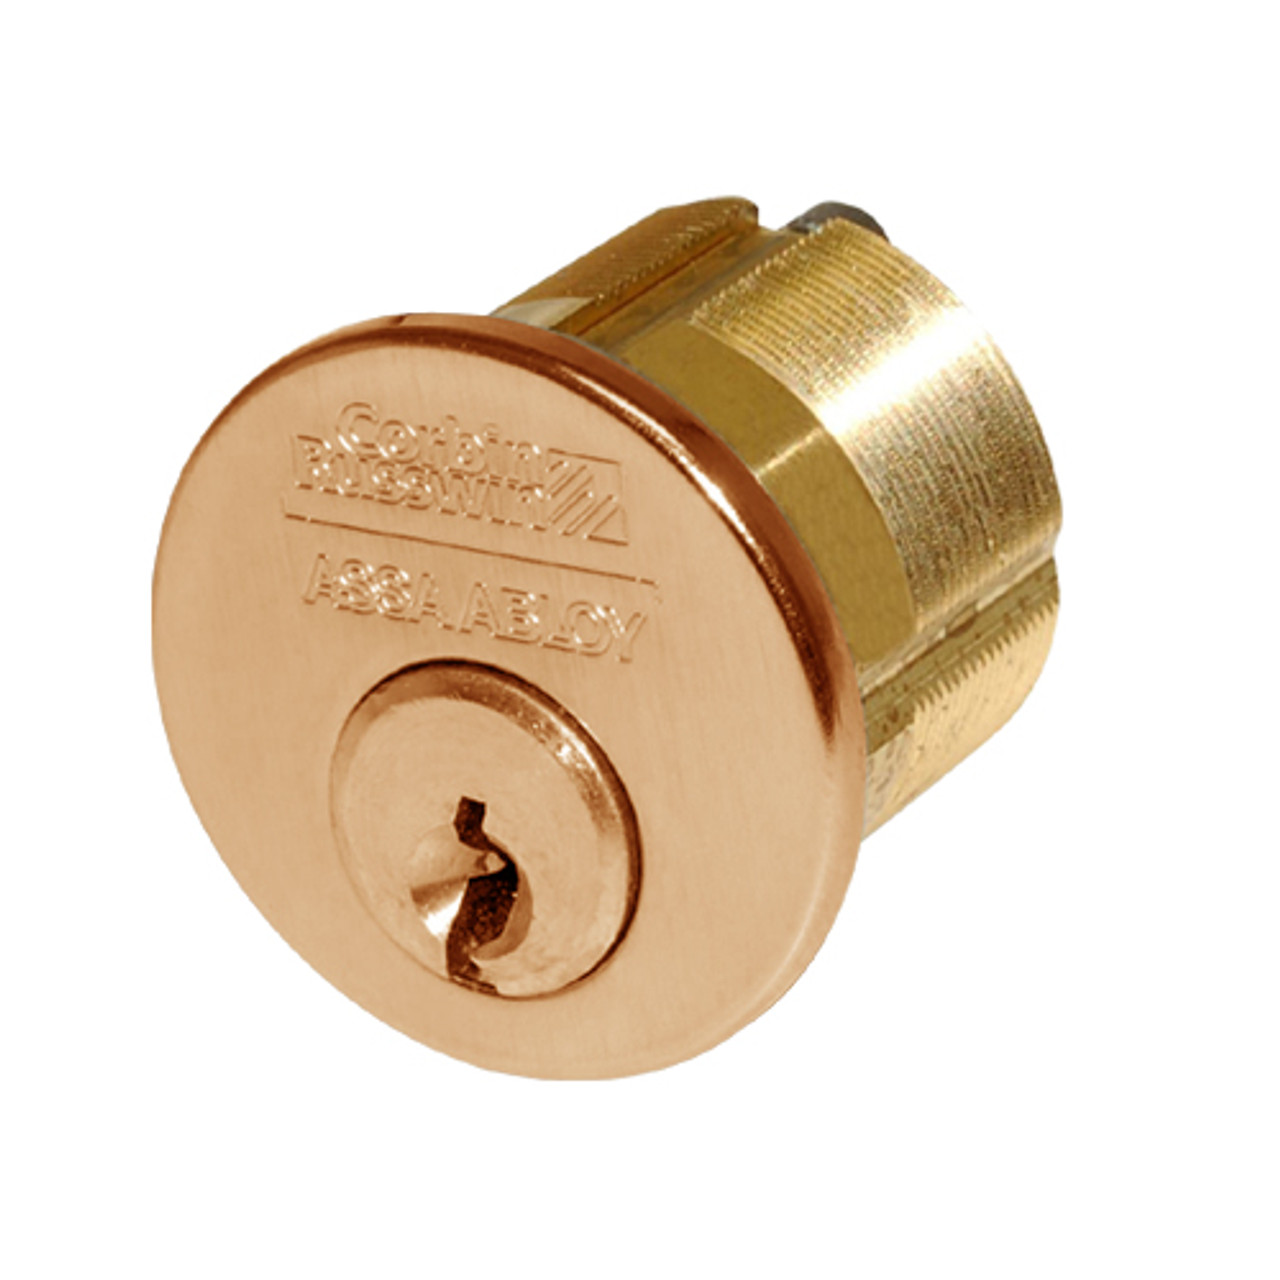 CR1000-138-A06-6-27A1-612 Corbin Conventional Mortise Cylinder for Mortise Lock and DL3000 Deadlocks with Schlage L9000 Cam in Satin Bronze Finish